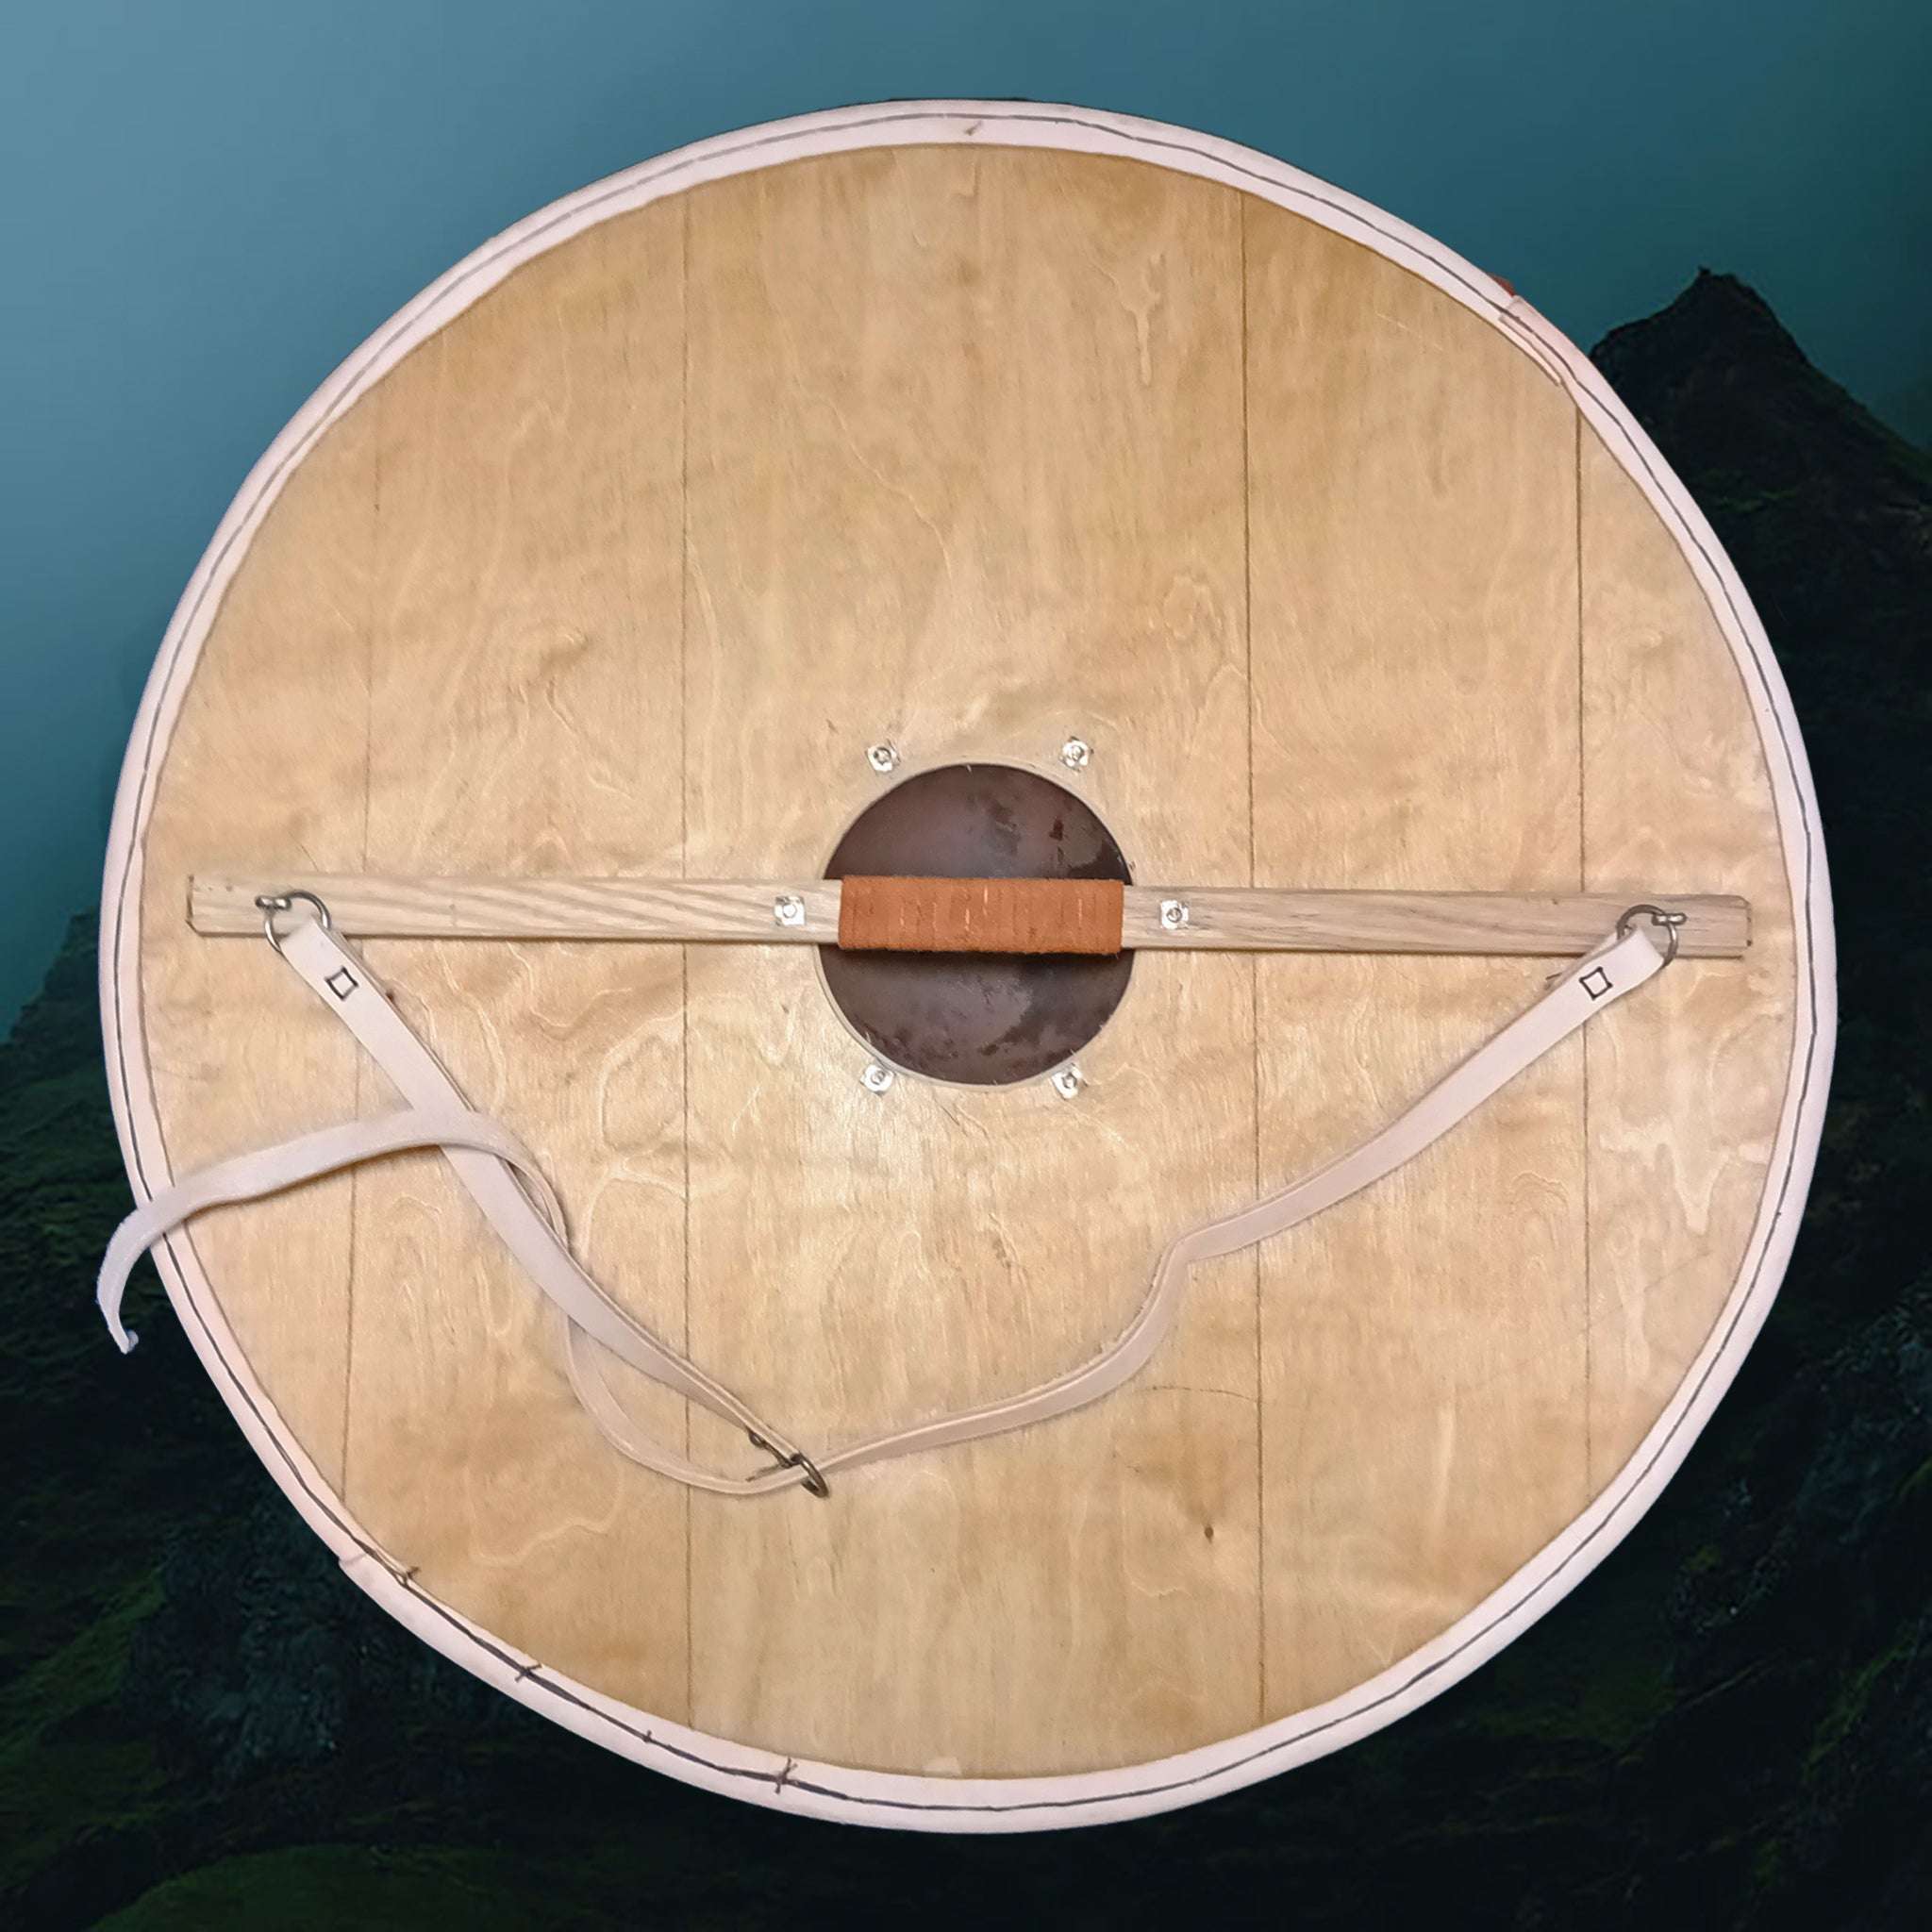 Viking Re-Enactment Shield - Back View with Handle and Strap